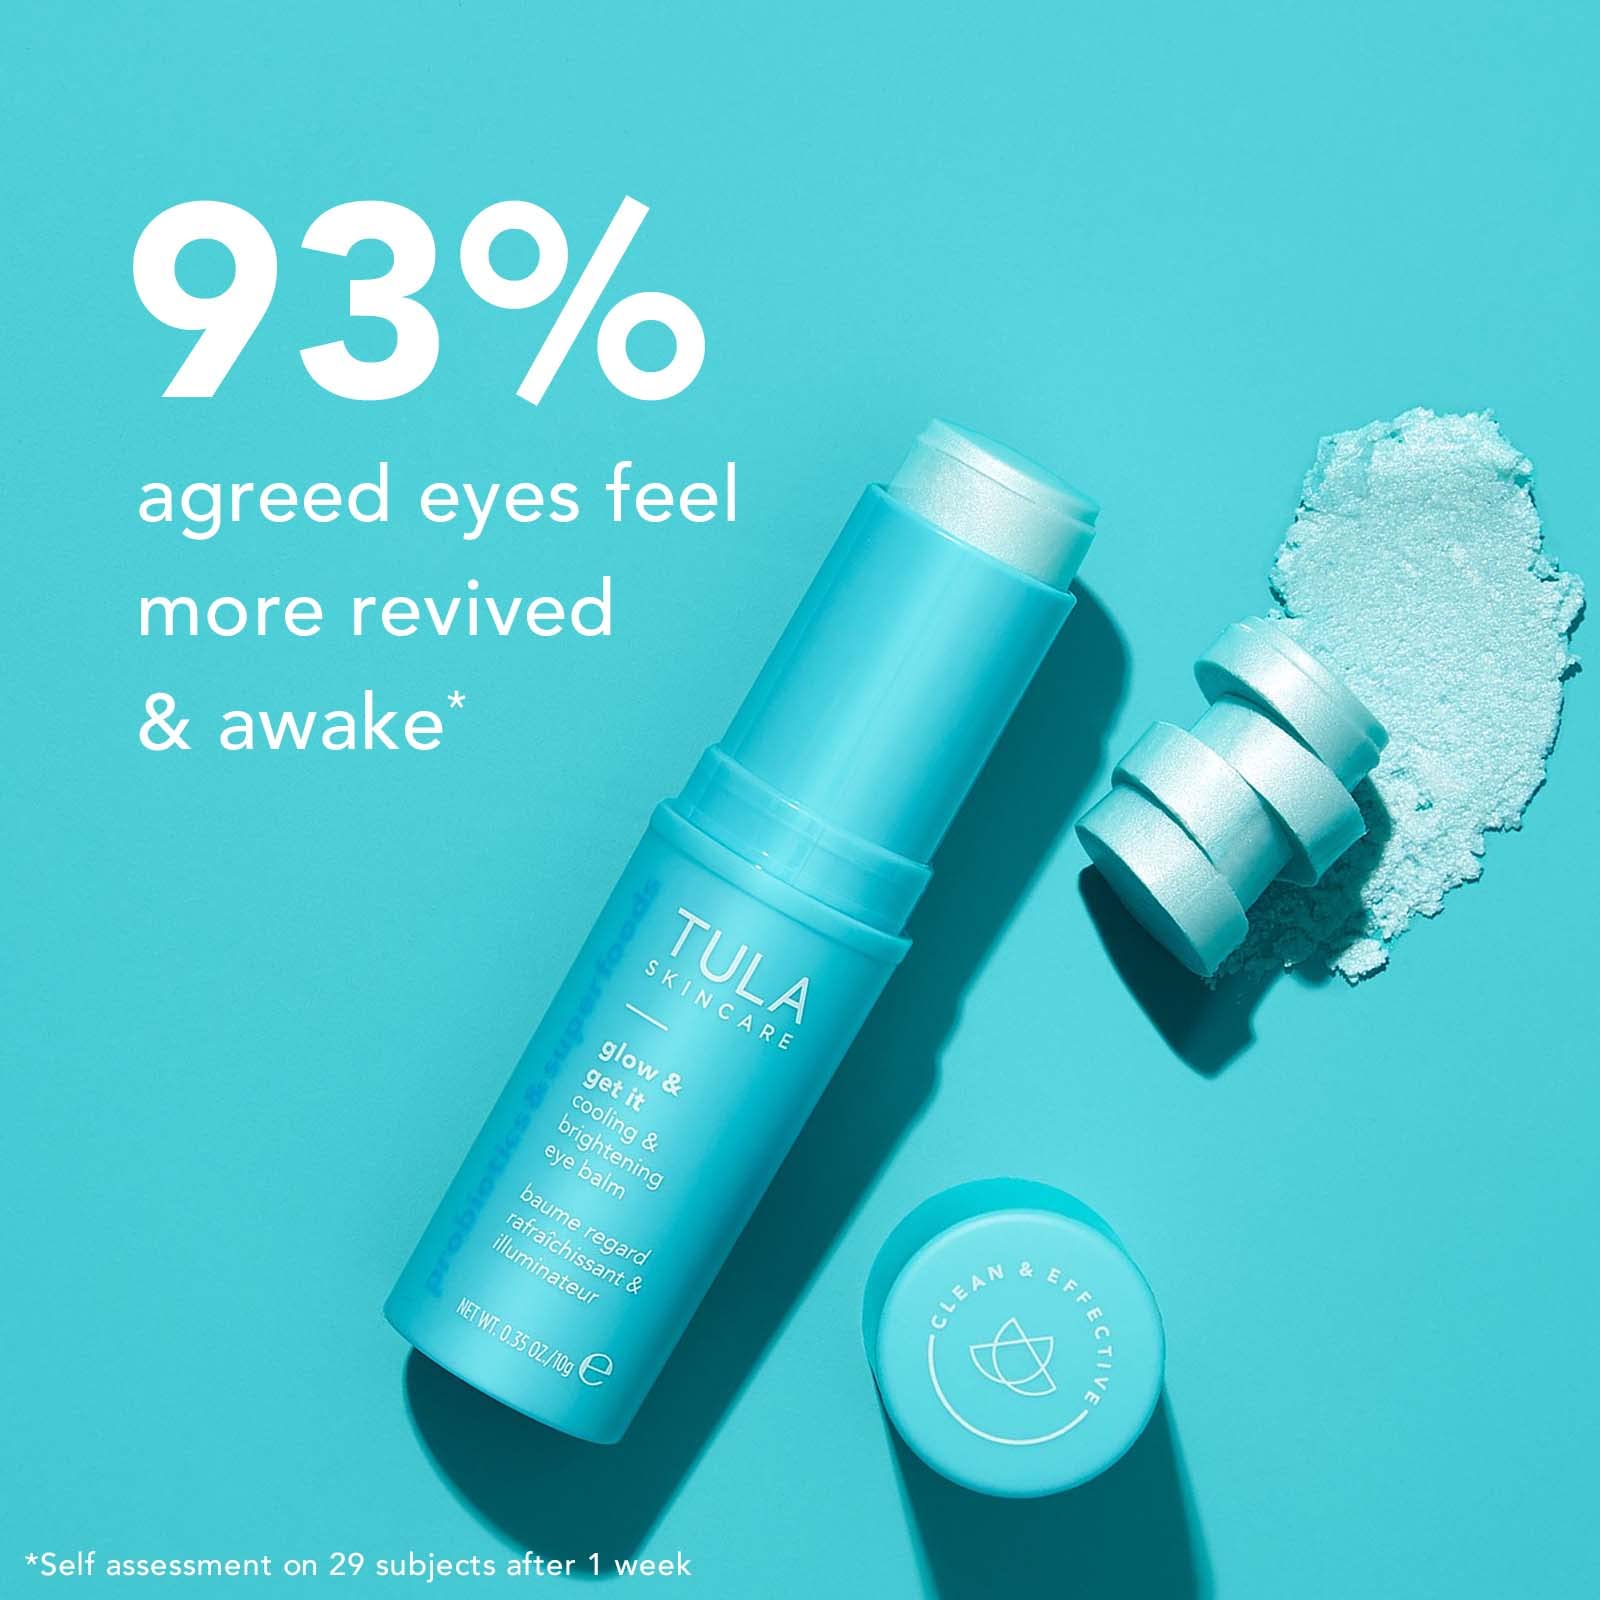 TULA Skin Care Eye Balm Glow & Get It - Dark Circle Treatment, Instantly Hydrate and Brighten Undereye Area, Portable and Perfect to Use On-the-go, 0.35oz